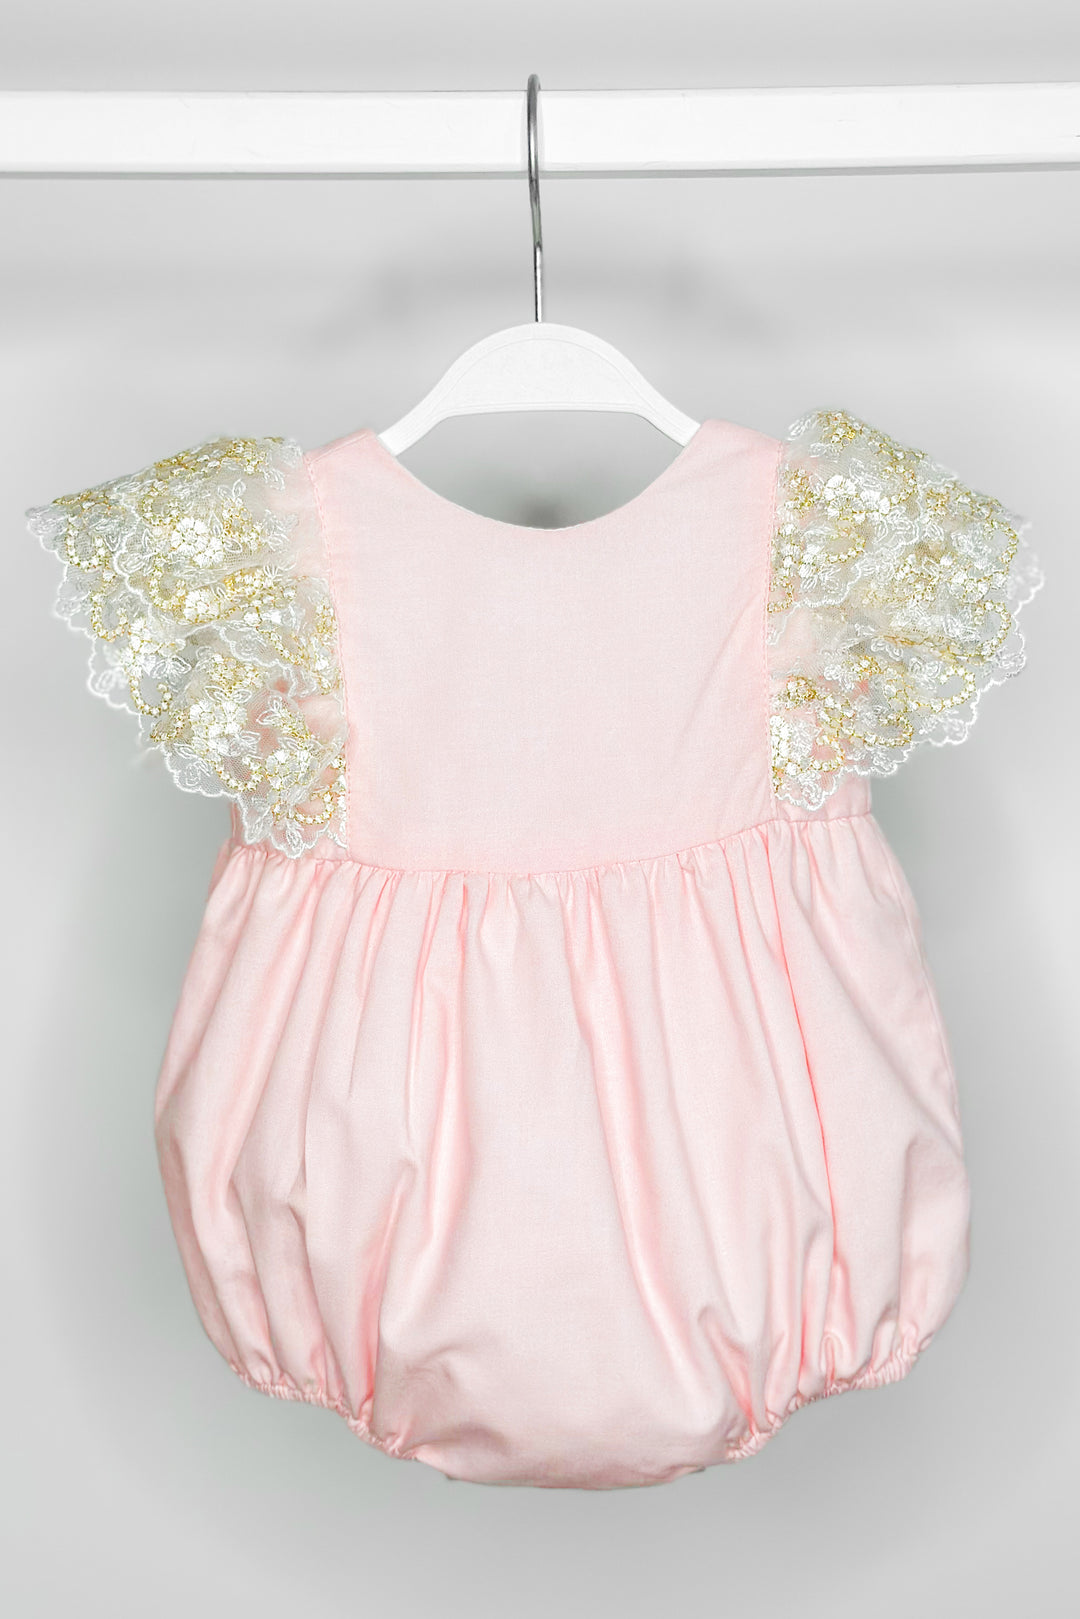 Fofettes "Alya" Pink Gold Lace Sleeve Romper | Millie and John